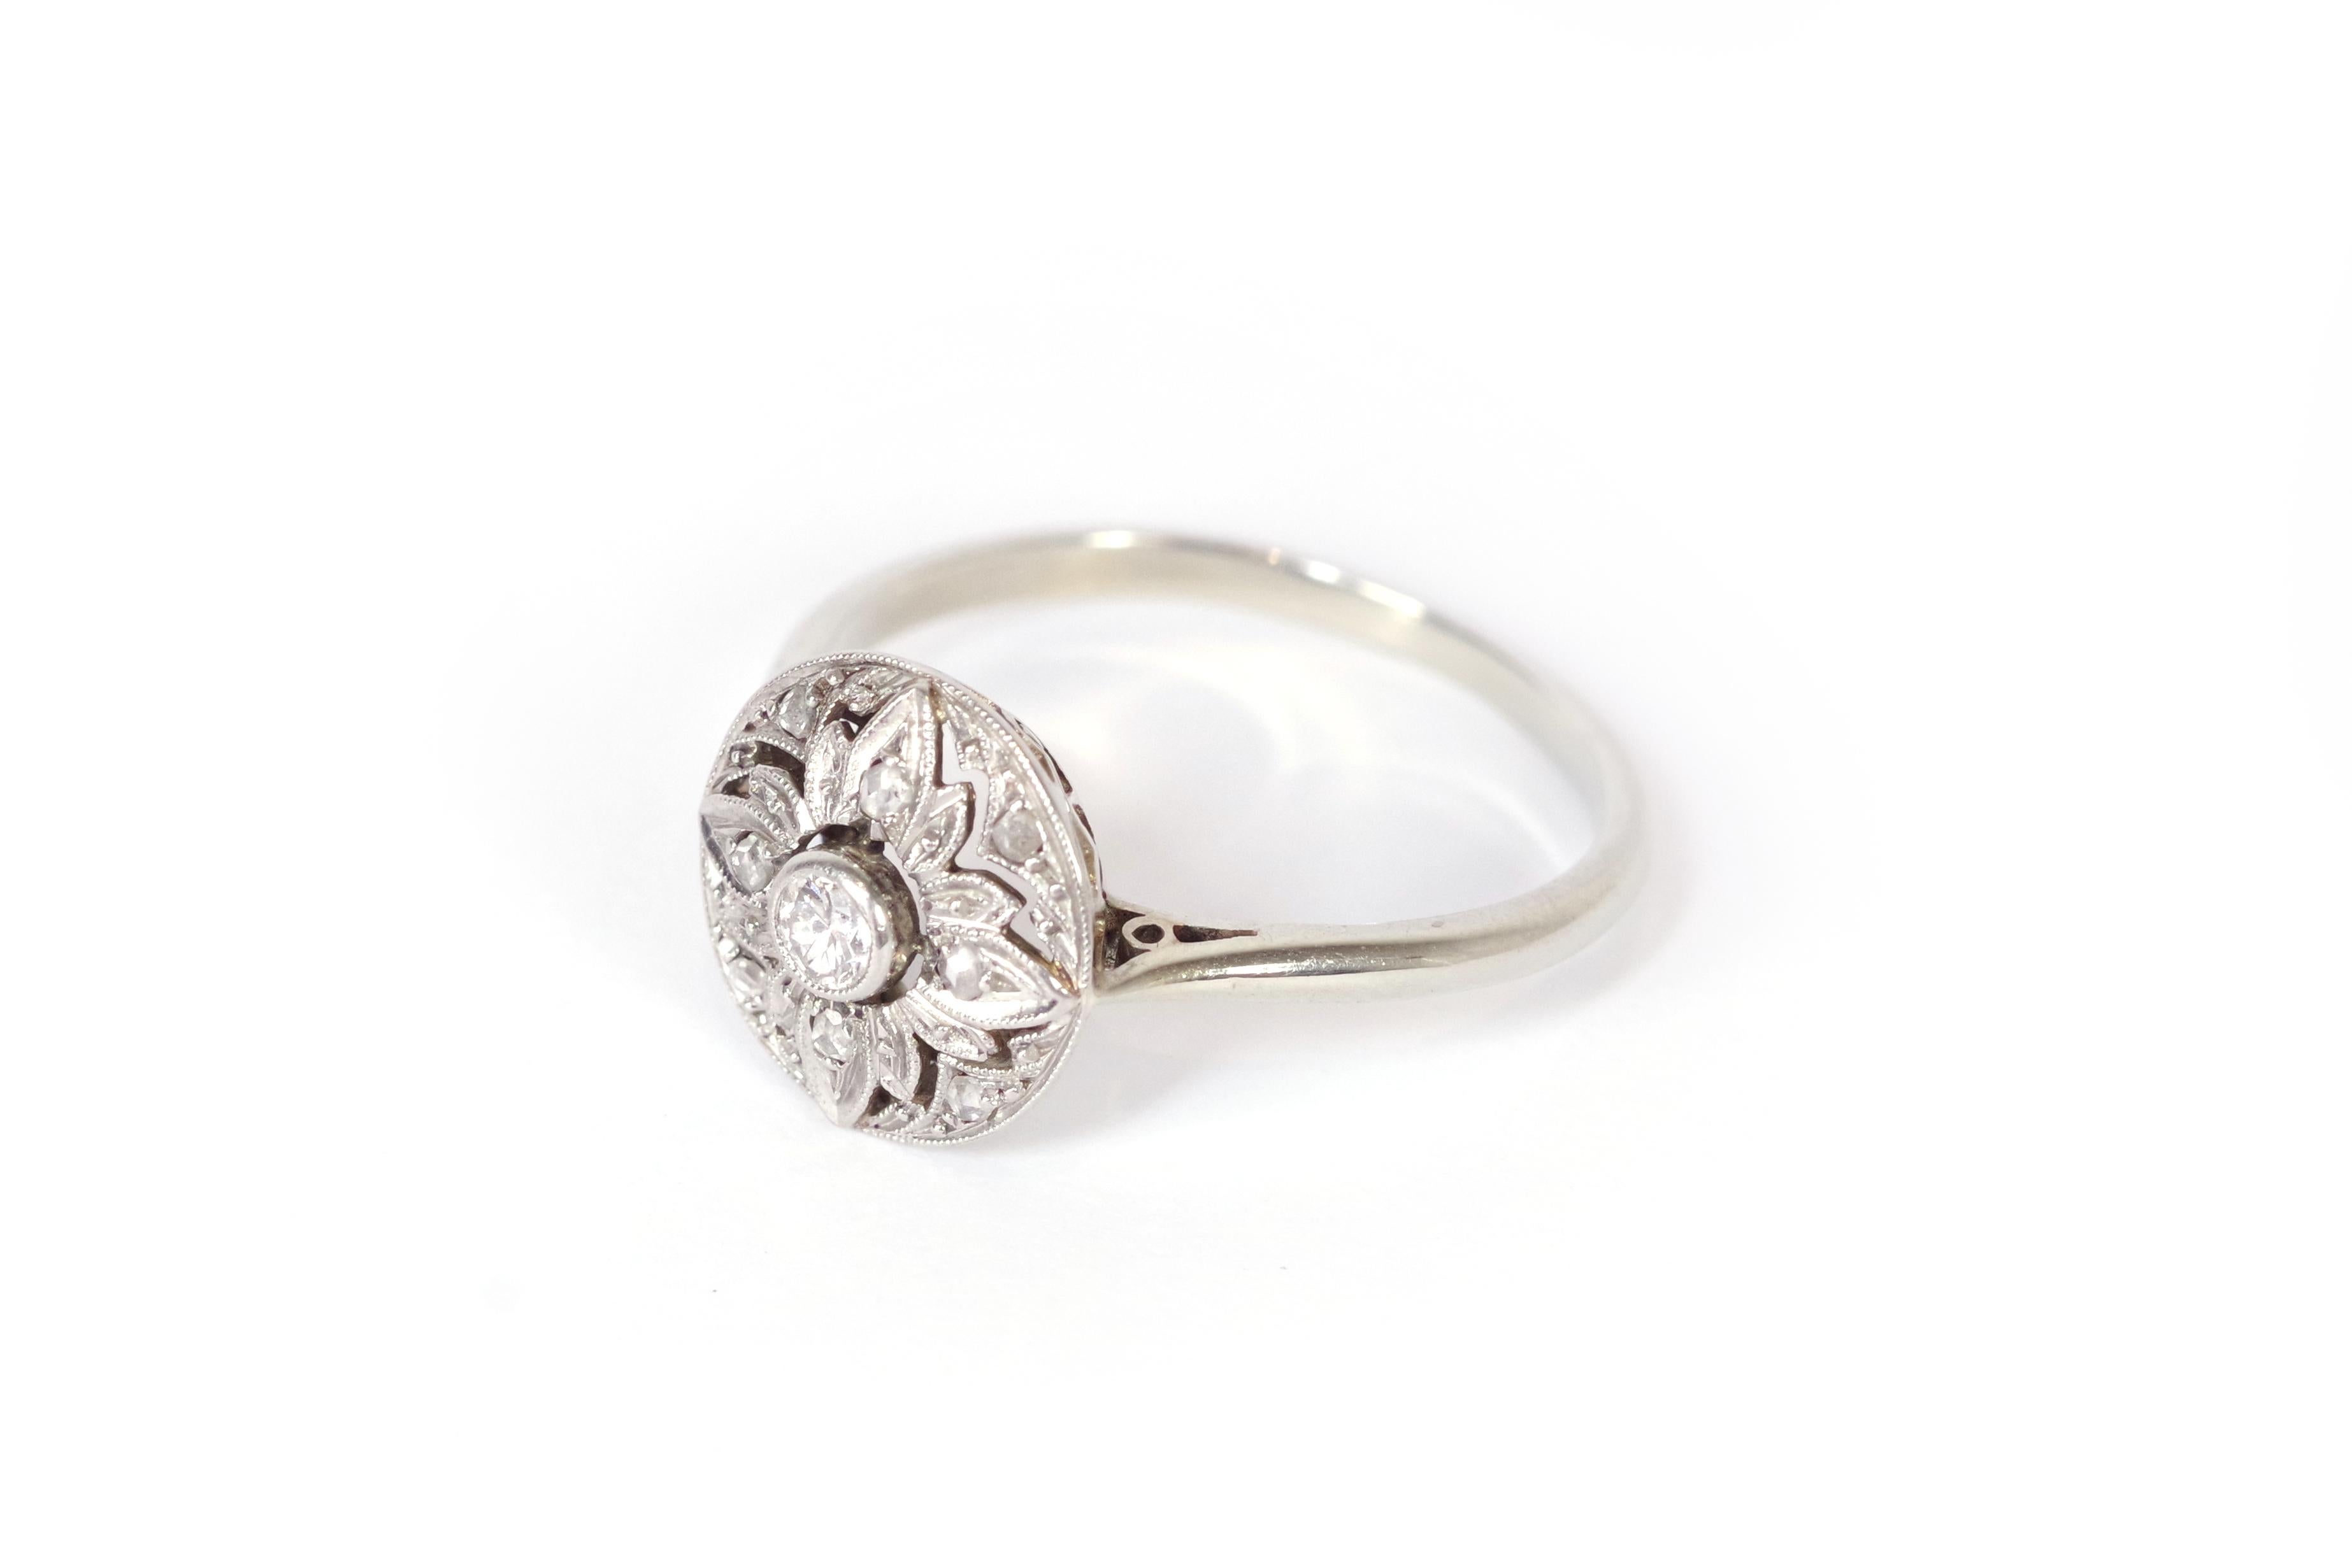 Art Deco round diamond ring in 18 Karat white gold and platinum. This Art Deco ring features a circular centerpiece with a brilliant-cut diamond in a beaded setting. The ring showcases geometric lines in beaded white gold forming a stylized flower